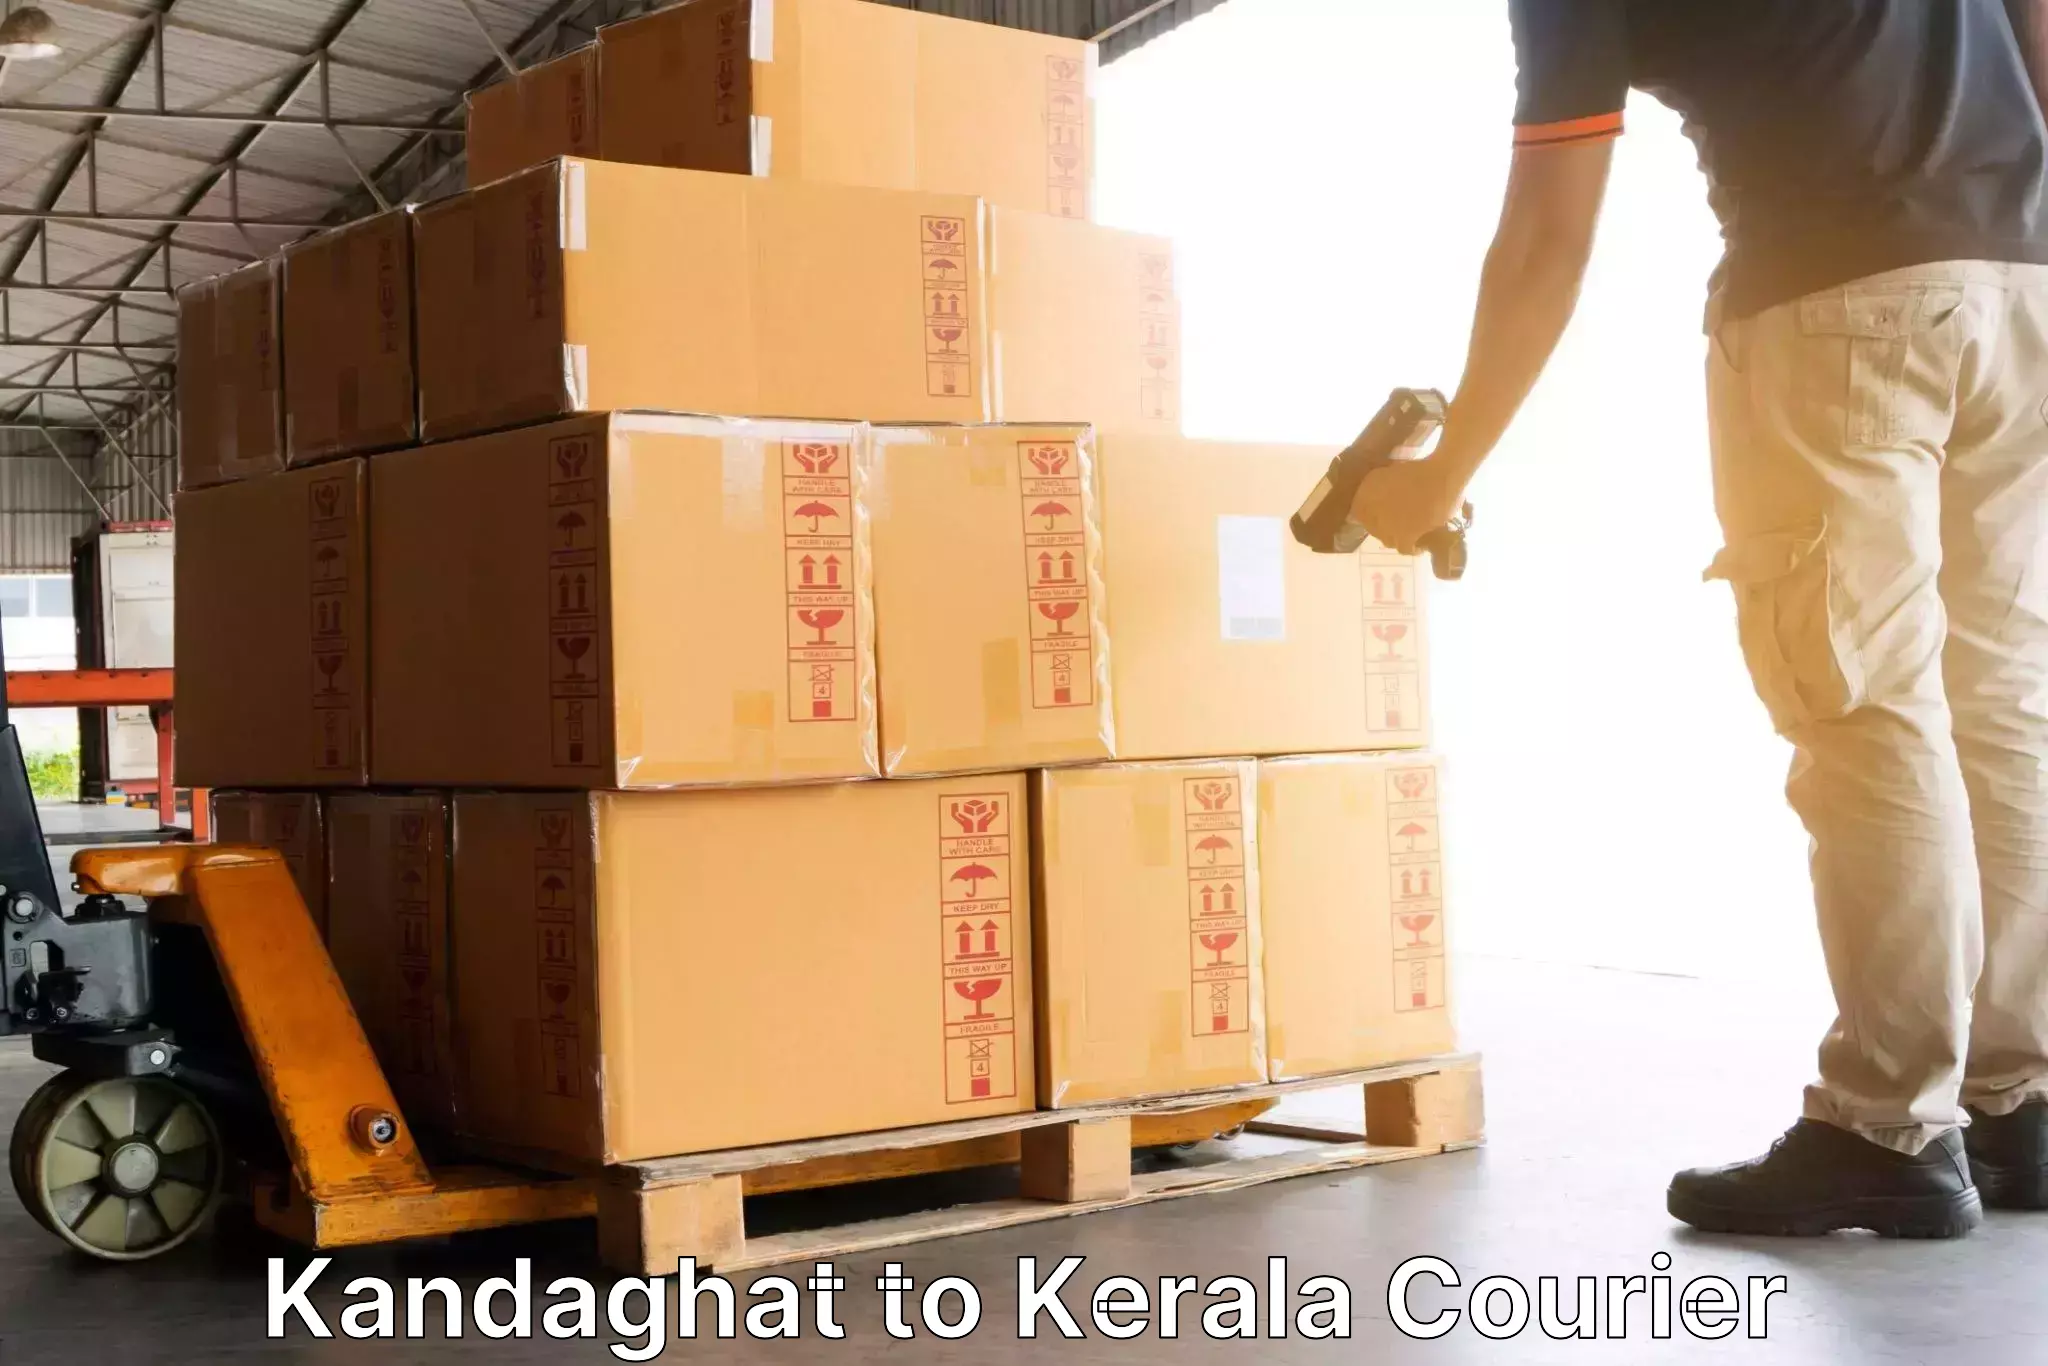 Express delivery network Kandaghat to Changanacherry